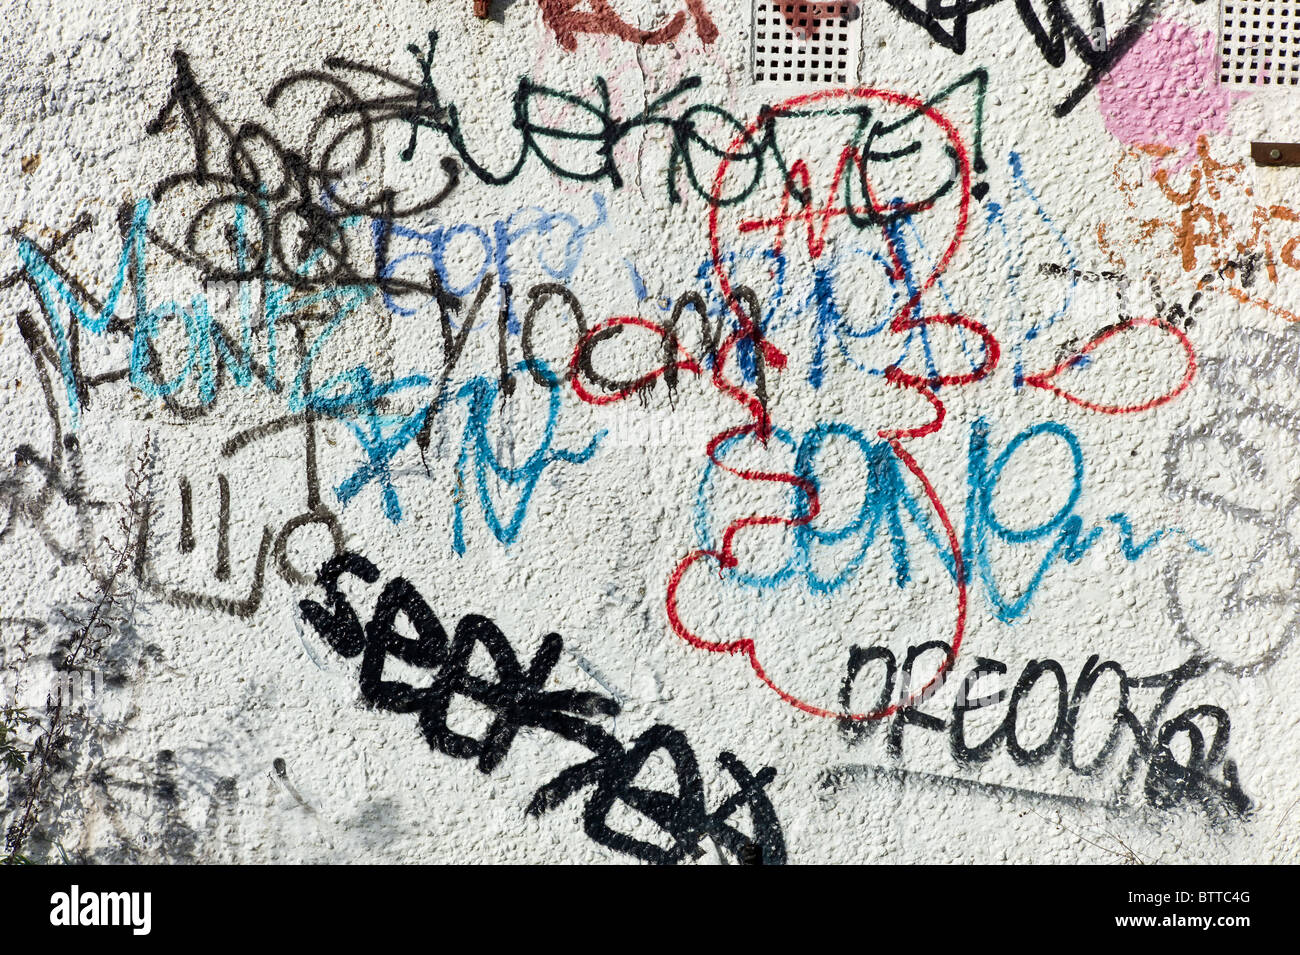 Graffiti Tag Names High Resolution Stock Photography And Images Alamy